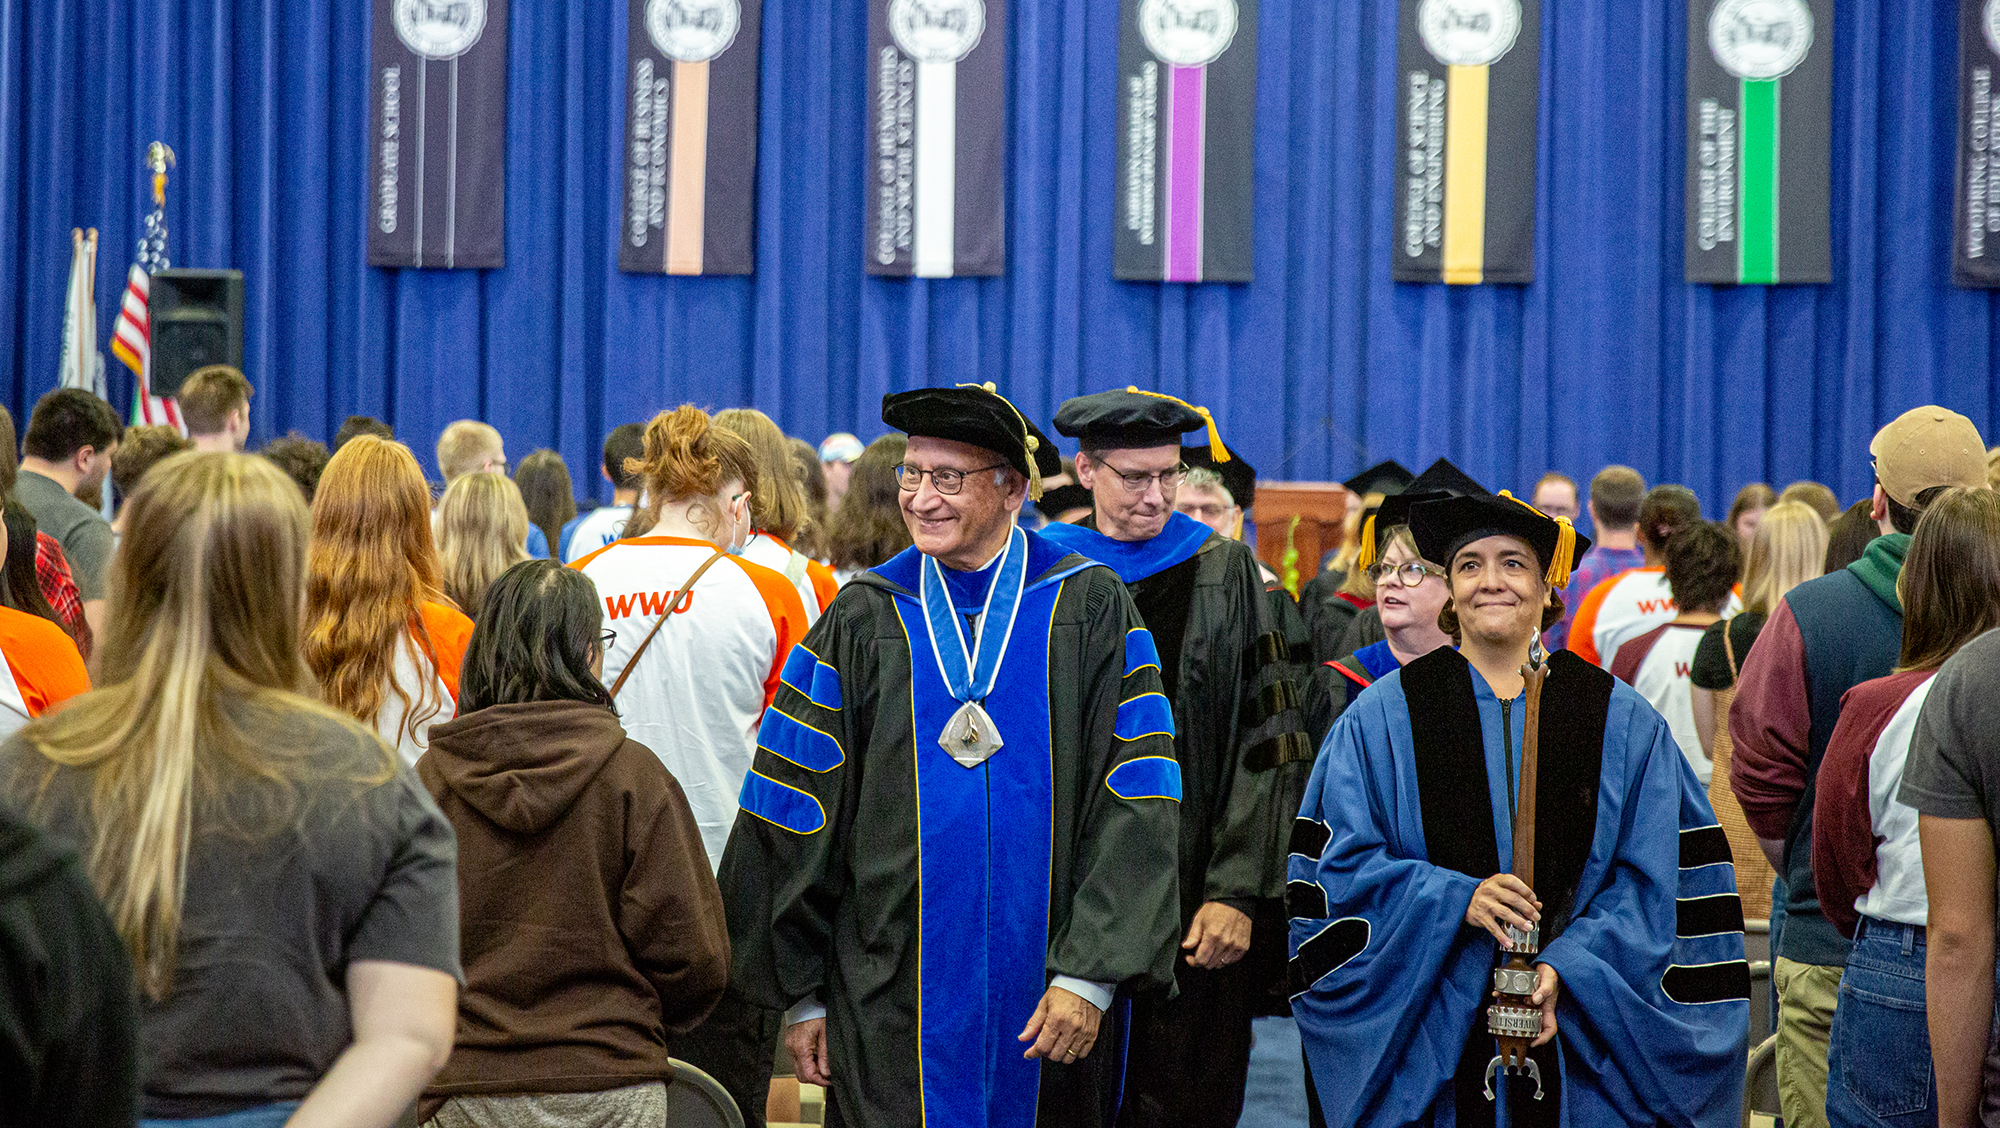 university administrators in academic regalia proceed through rows of standing students